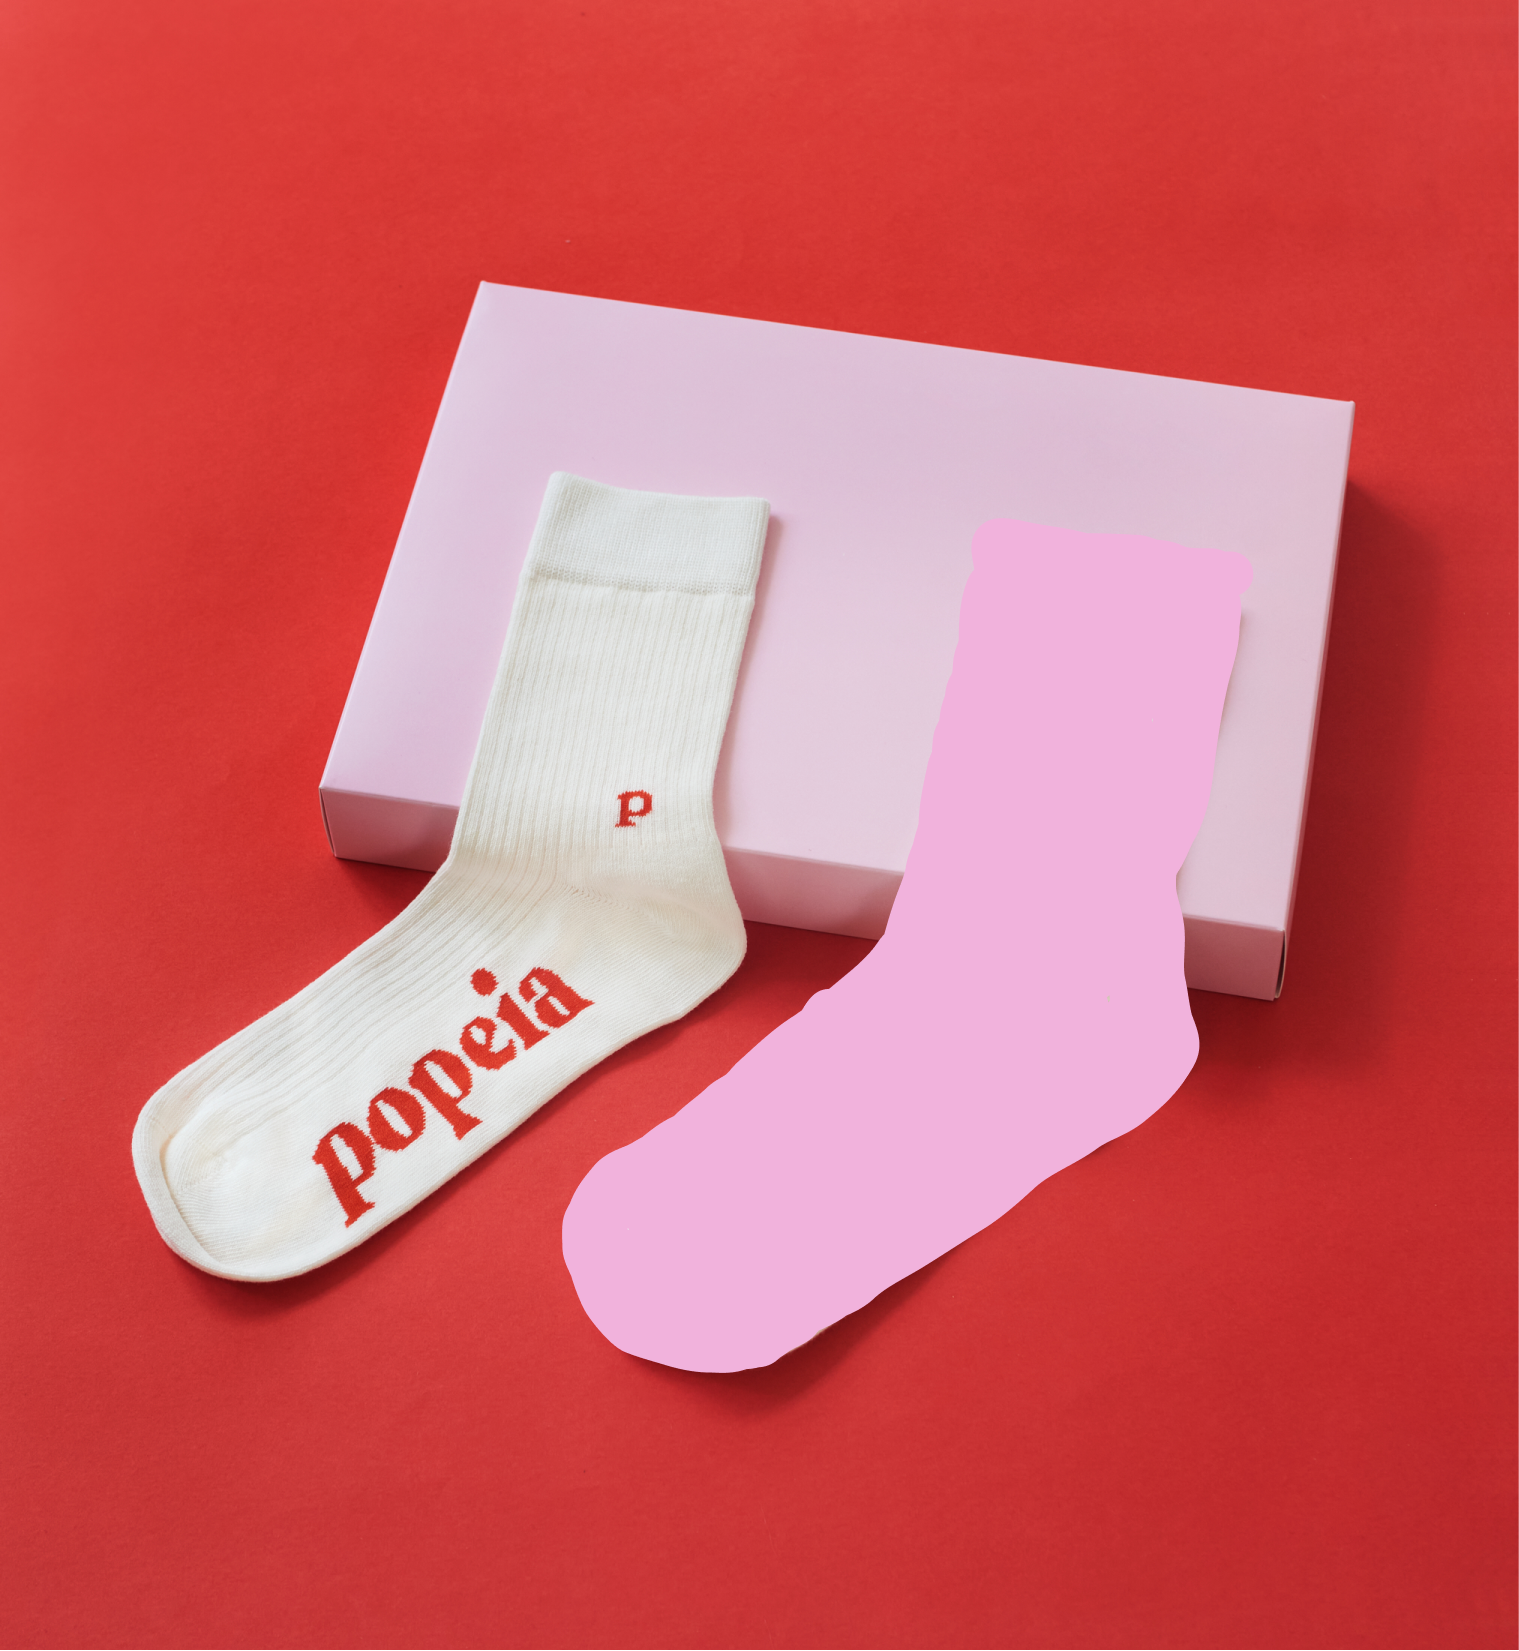 Single sock made from organic cotton